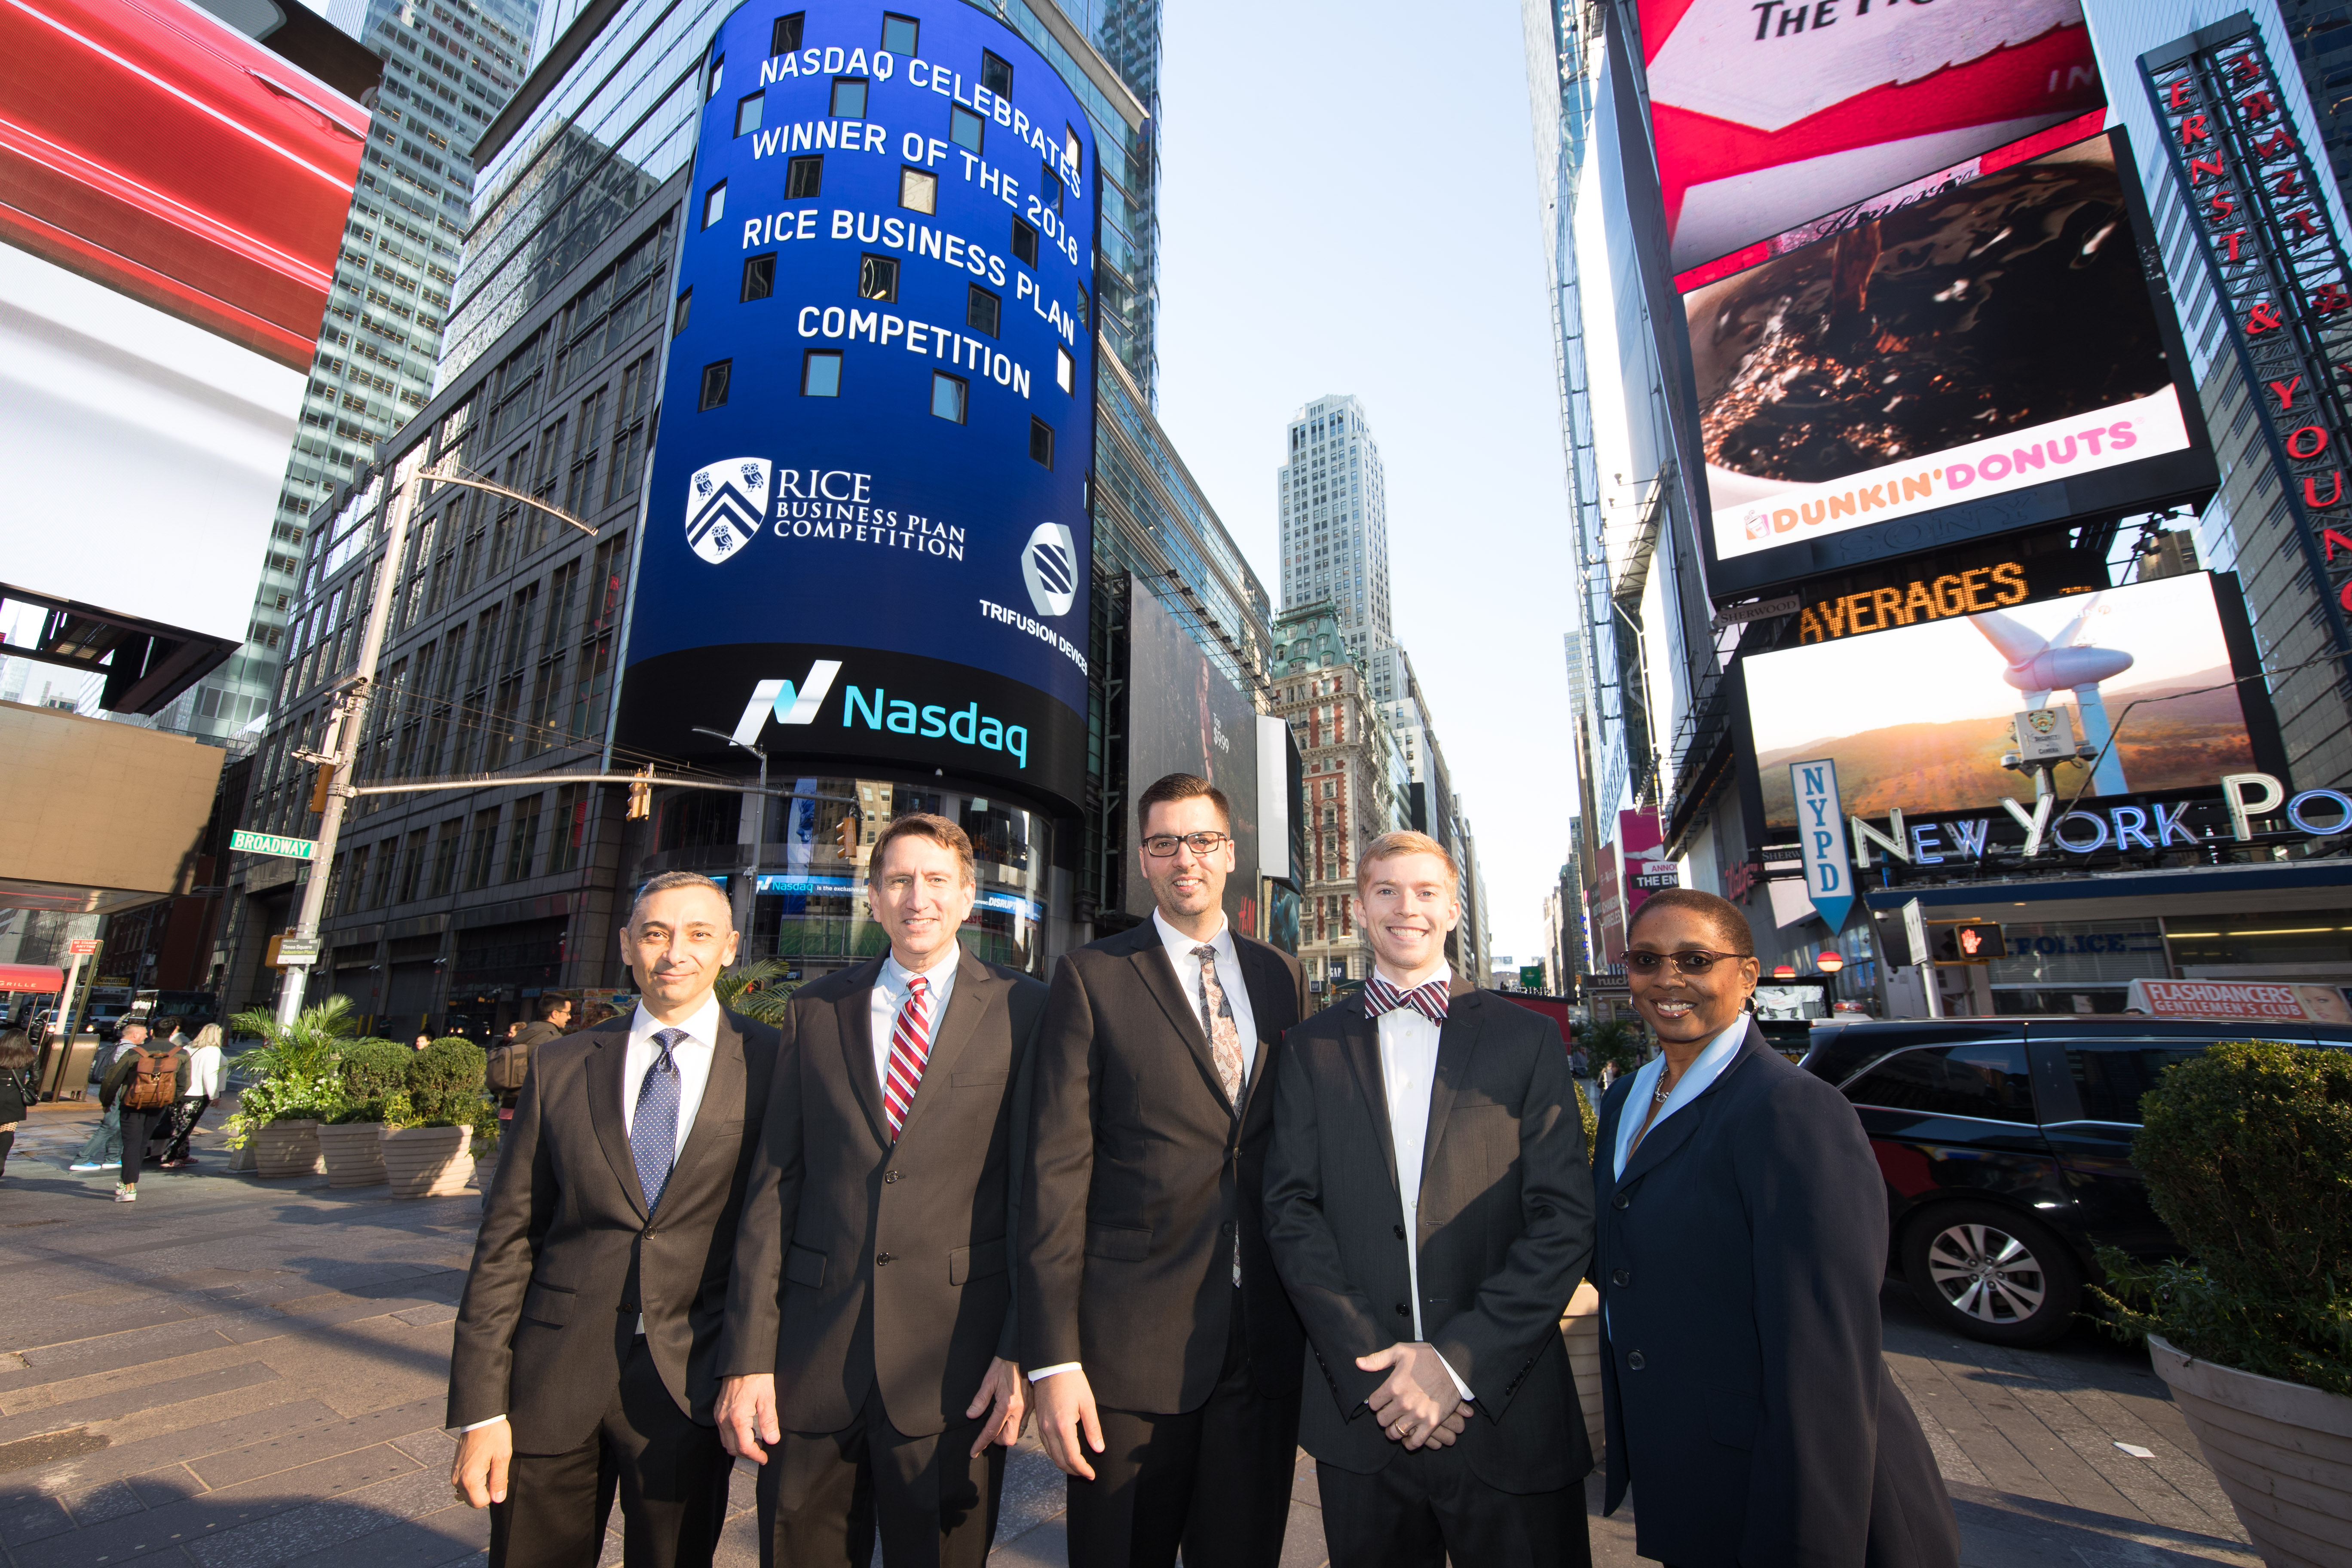 Pictured in front of the Nasdaq MarketSite in Times Square are Peter Rodriguez, Brad Burke, Blake Teipel, Brandon Sweeney,  Gene Birdwell; and Dr. Valerie Taylor